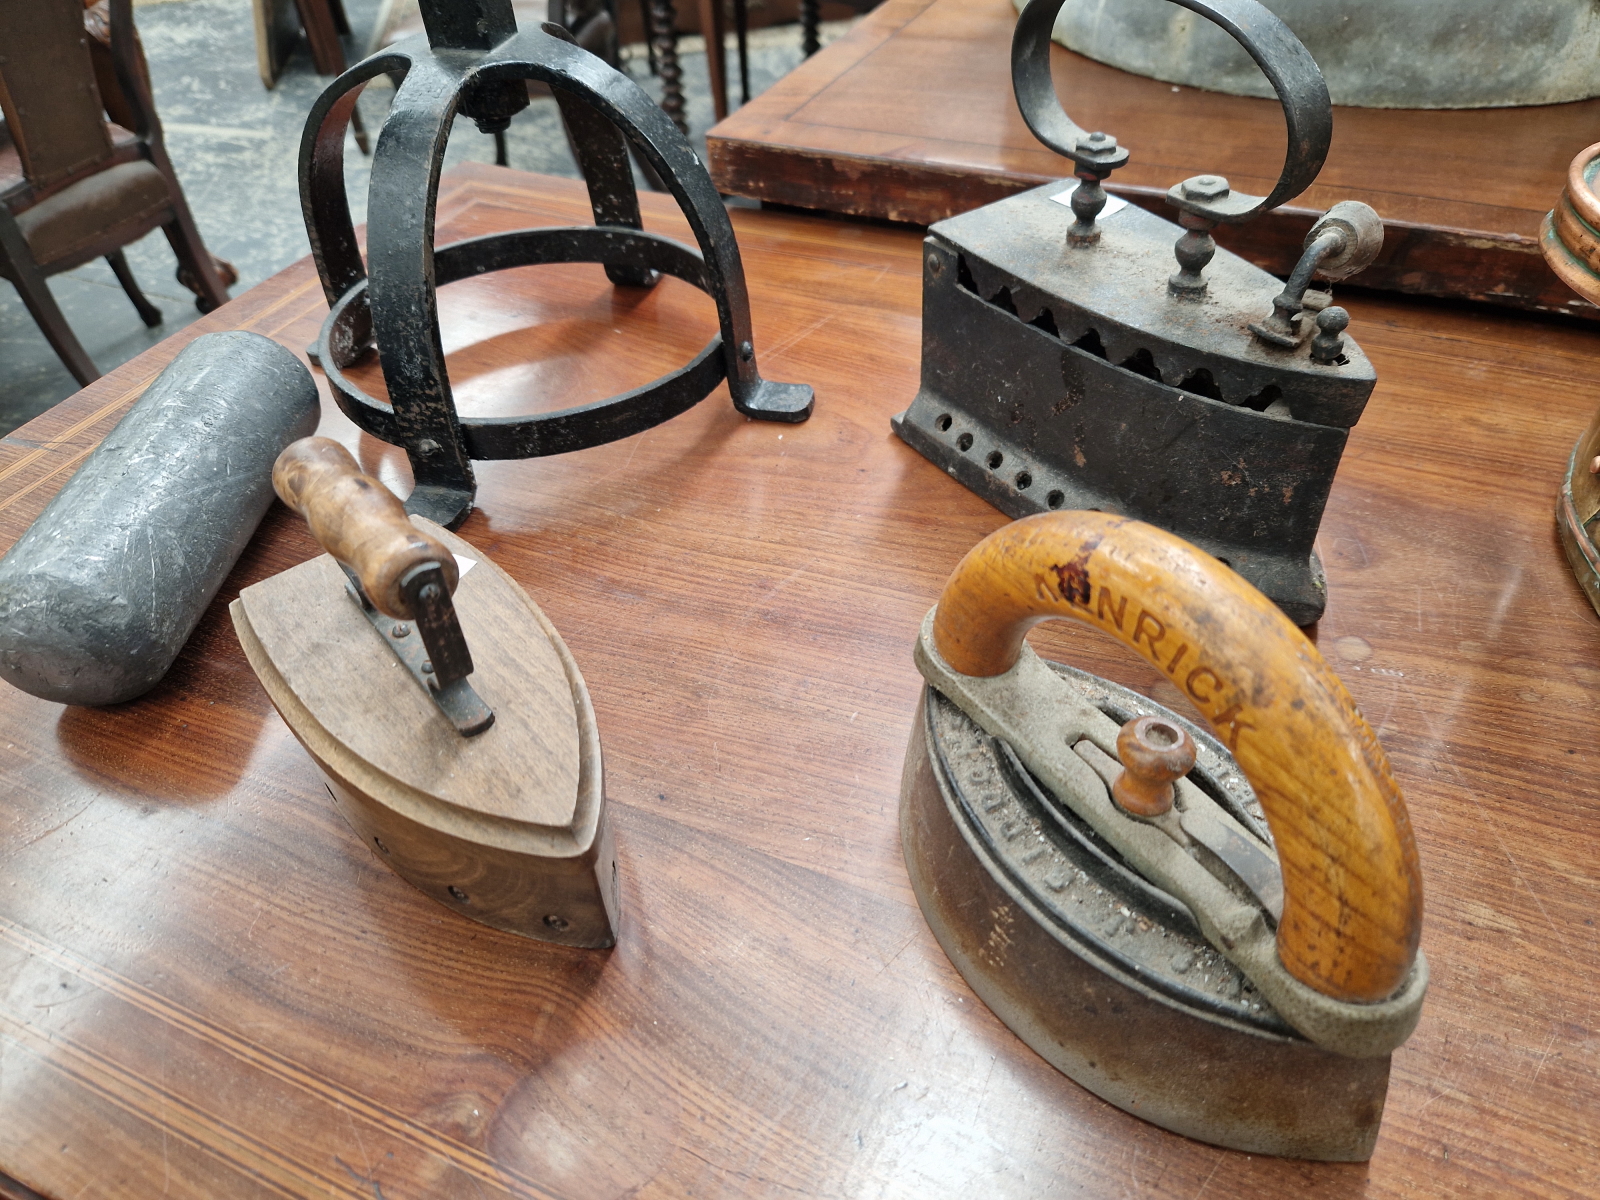 A PAIR OF SPIRALLY WROUGHT IRON FLOOR STANDING CANDLESTICKS, SIX CLOTHES IRONS, A MINERS LAMP AND - Image 5 of 7